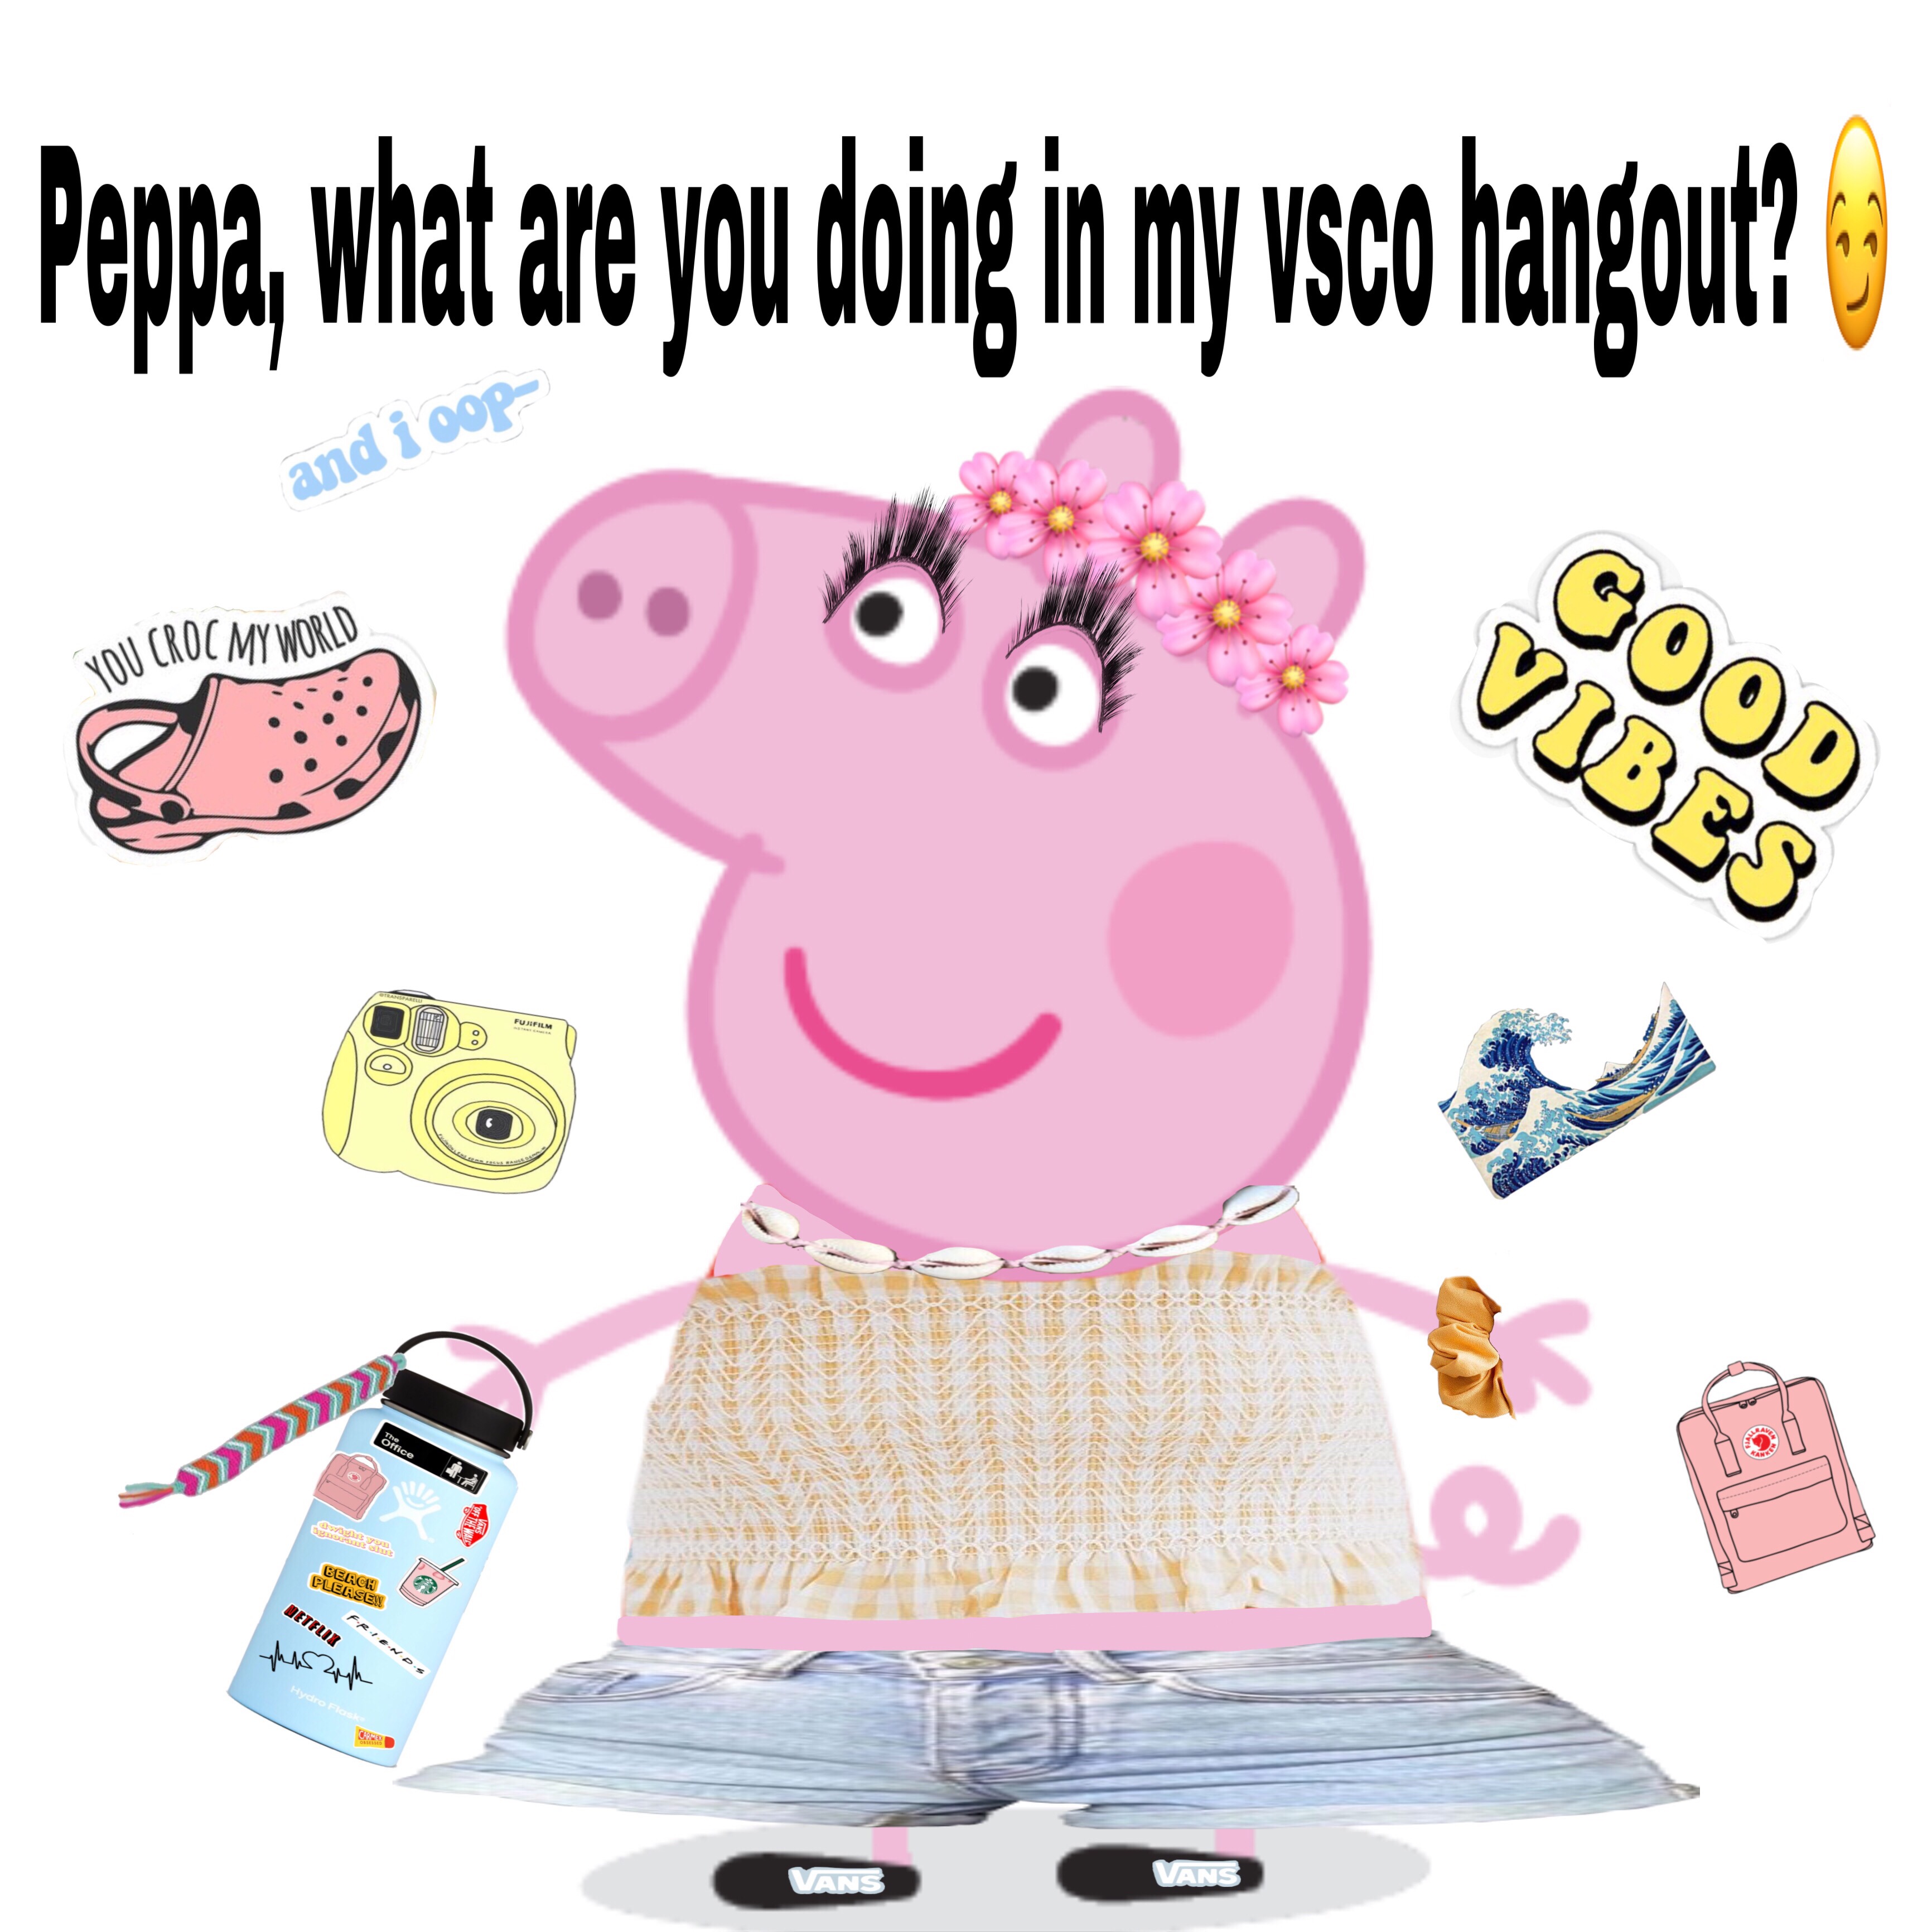 Peppa Pig Memes Peppa Pig Memes Peppa Pig Funny Pig Memes | Images and ...